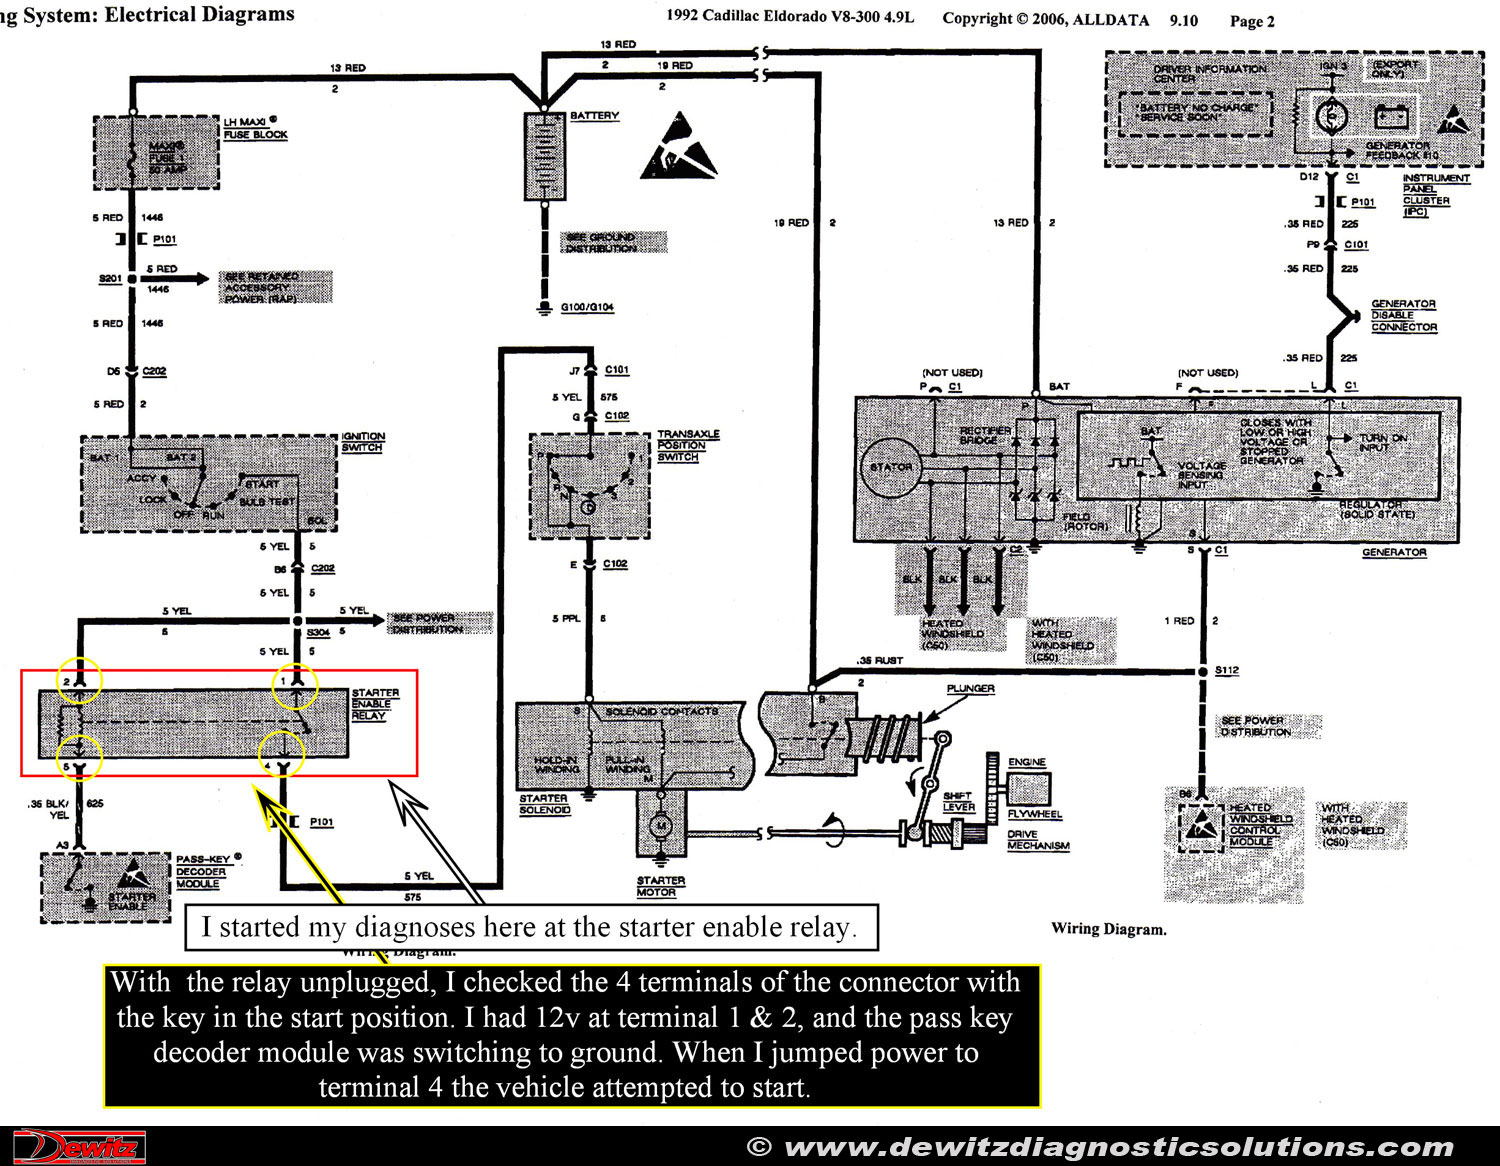 1994 Ford F150 Starter Solenoid Wiring Diagram from www.dewitzdiagnosticsolutions.com